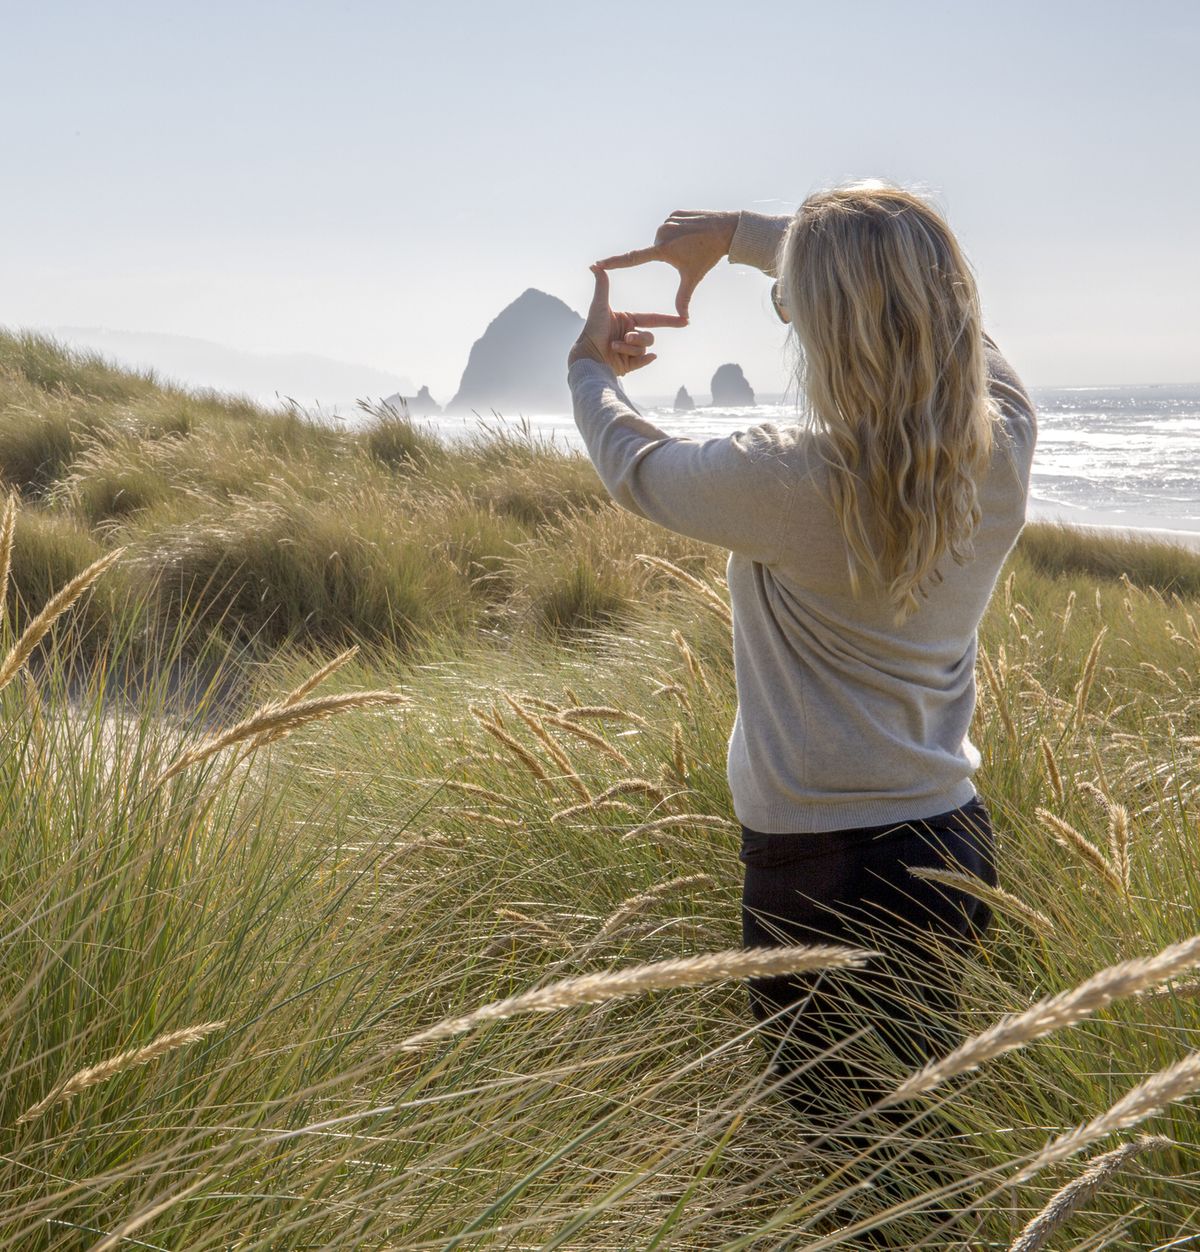 woman relaxes in grassy meadow on coastline in the morning